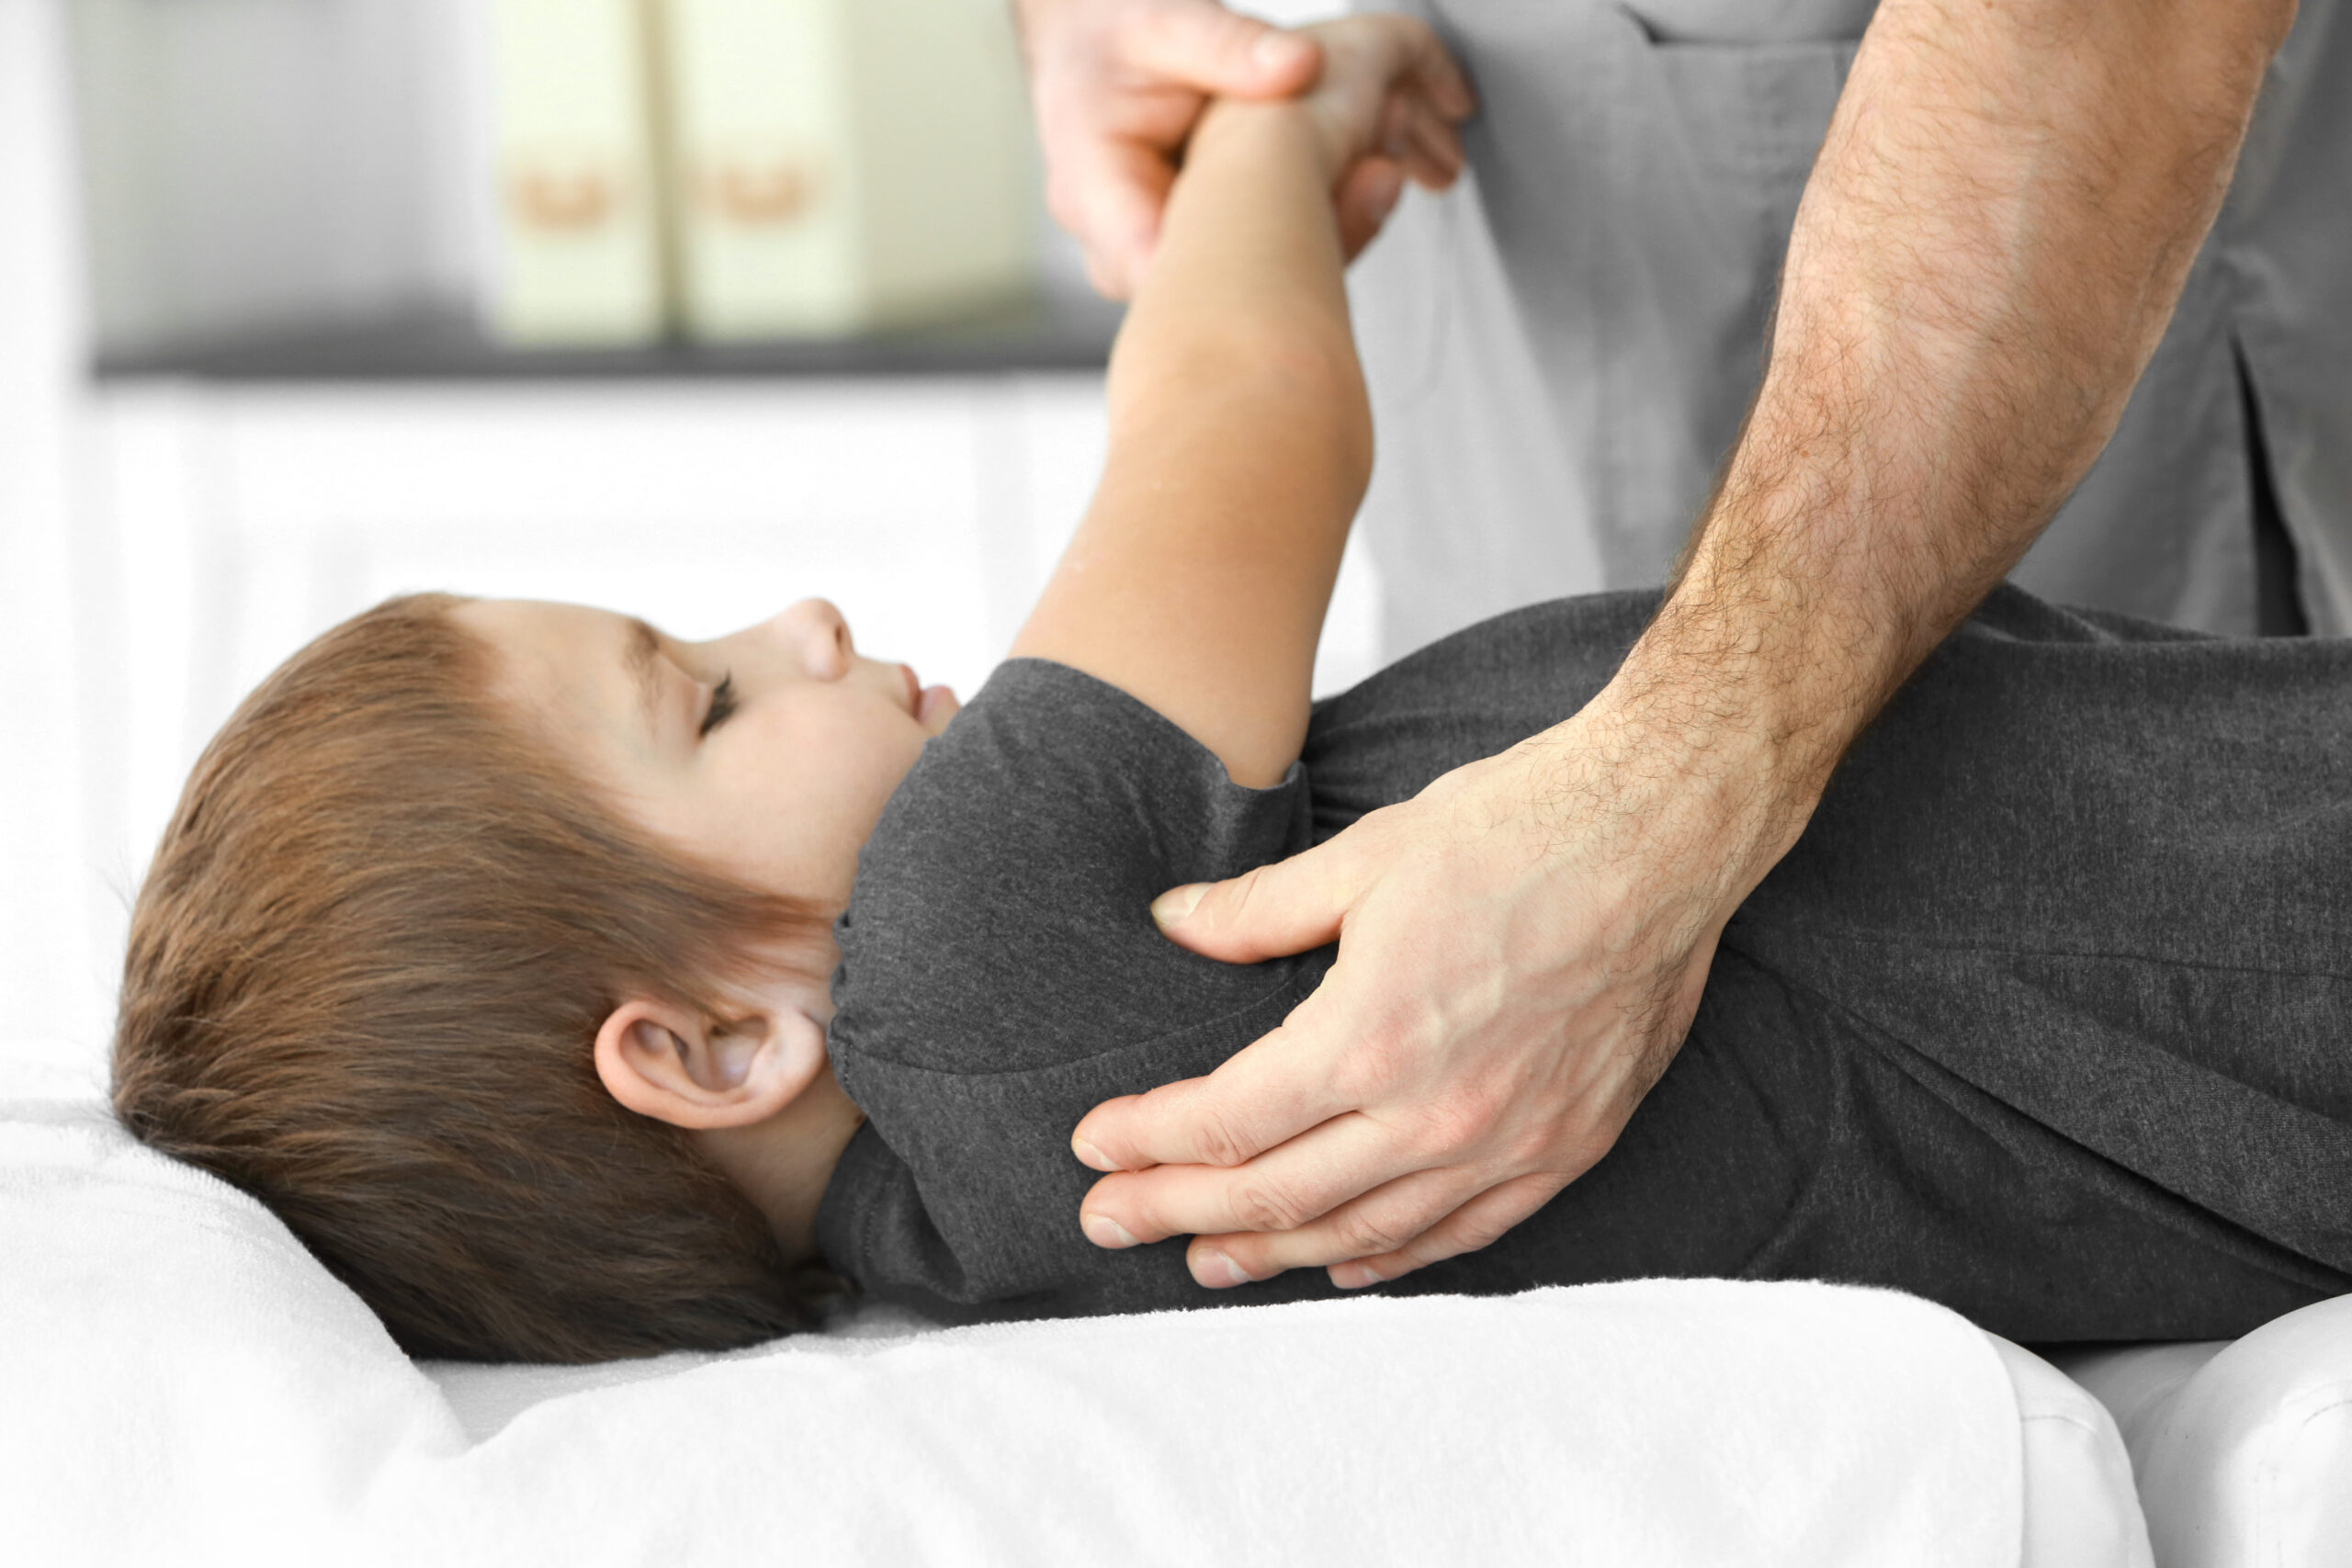 How can chiropractic care help my child?